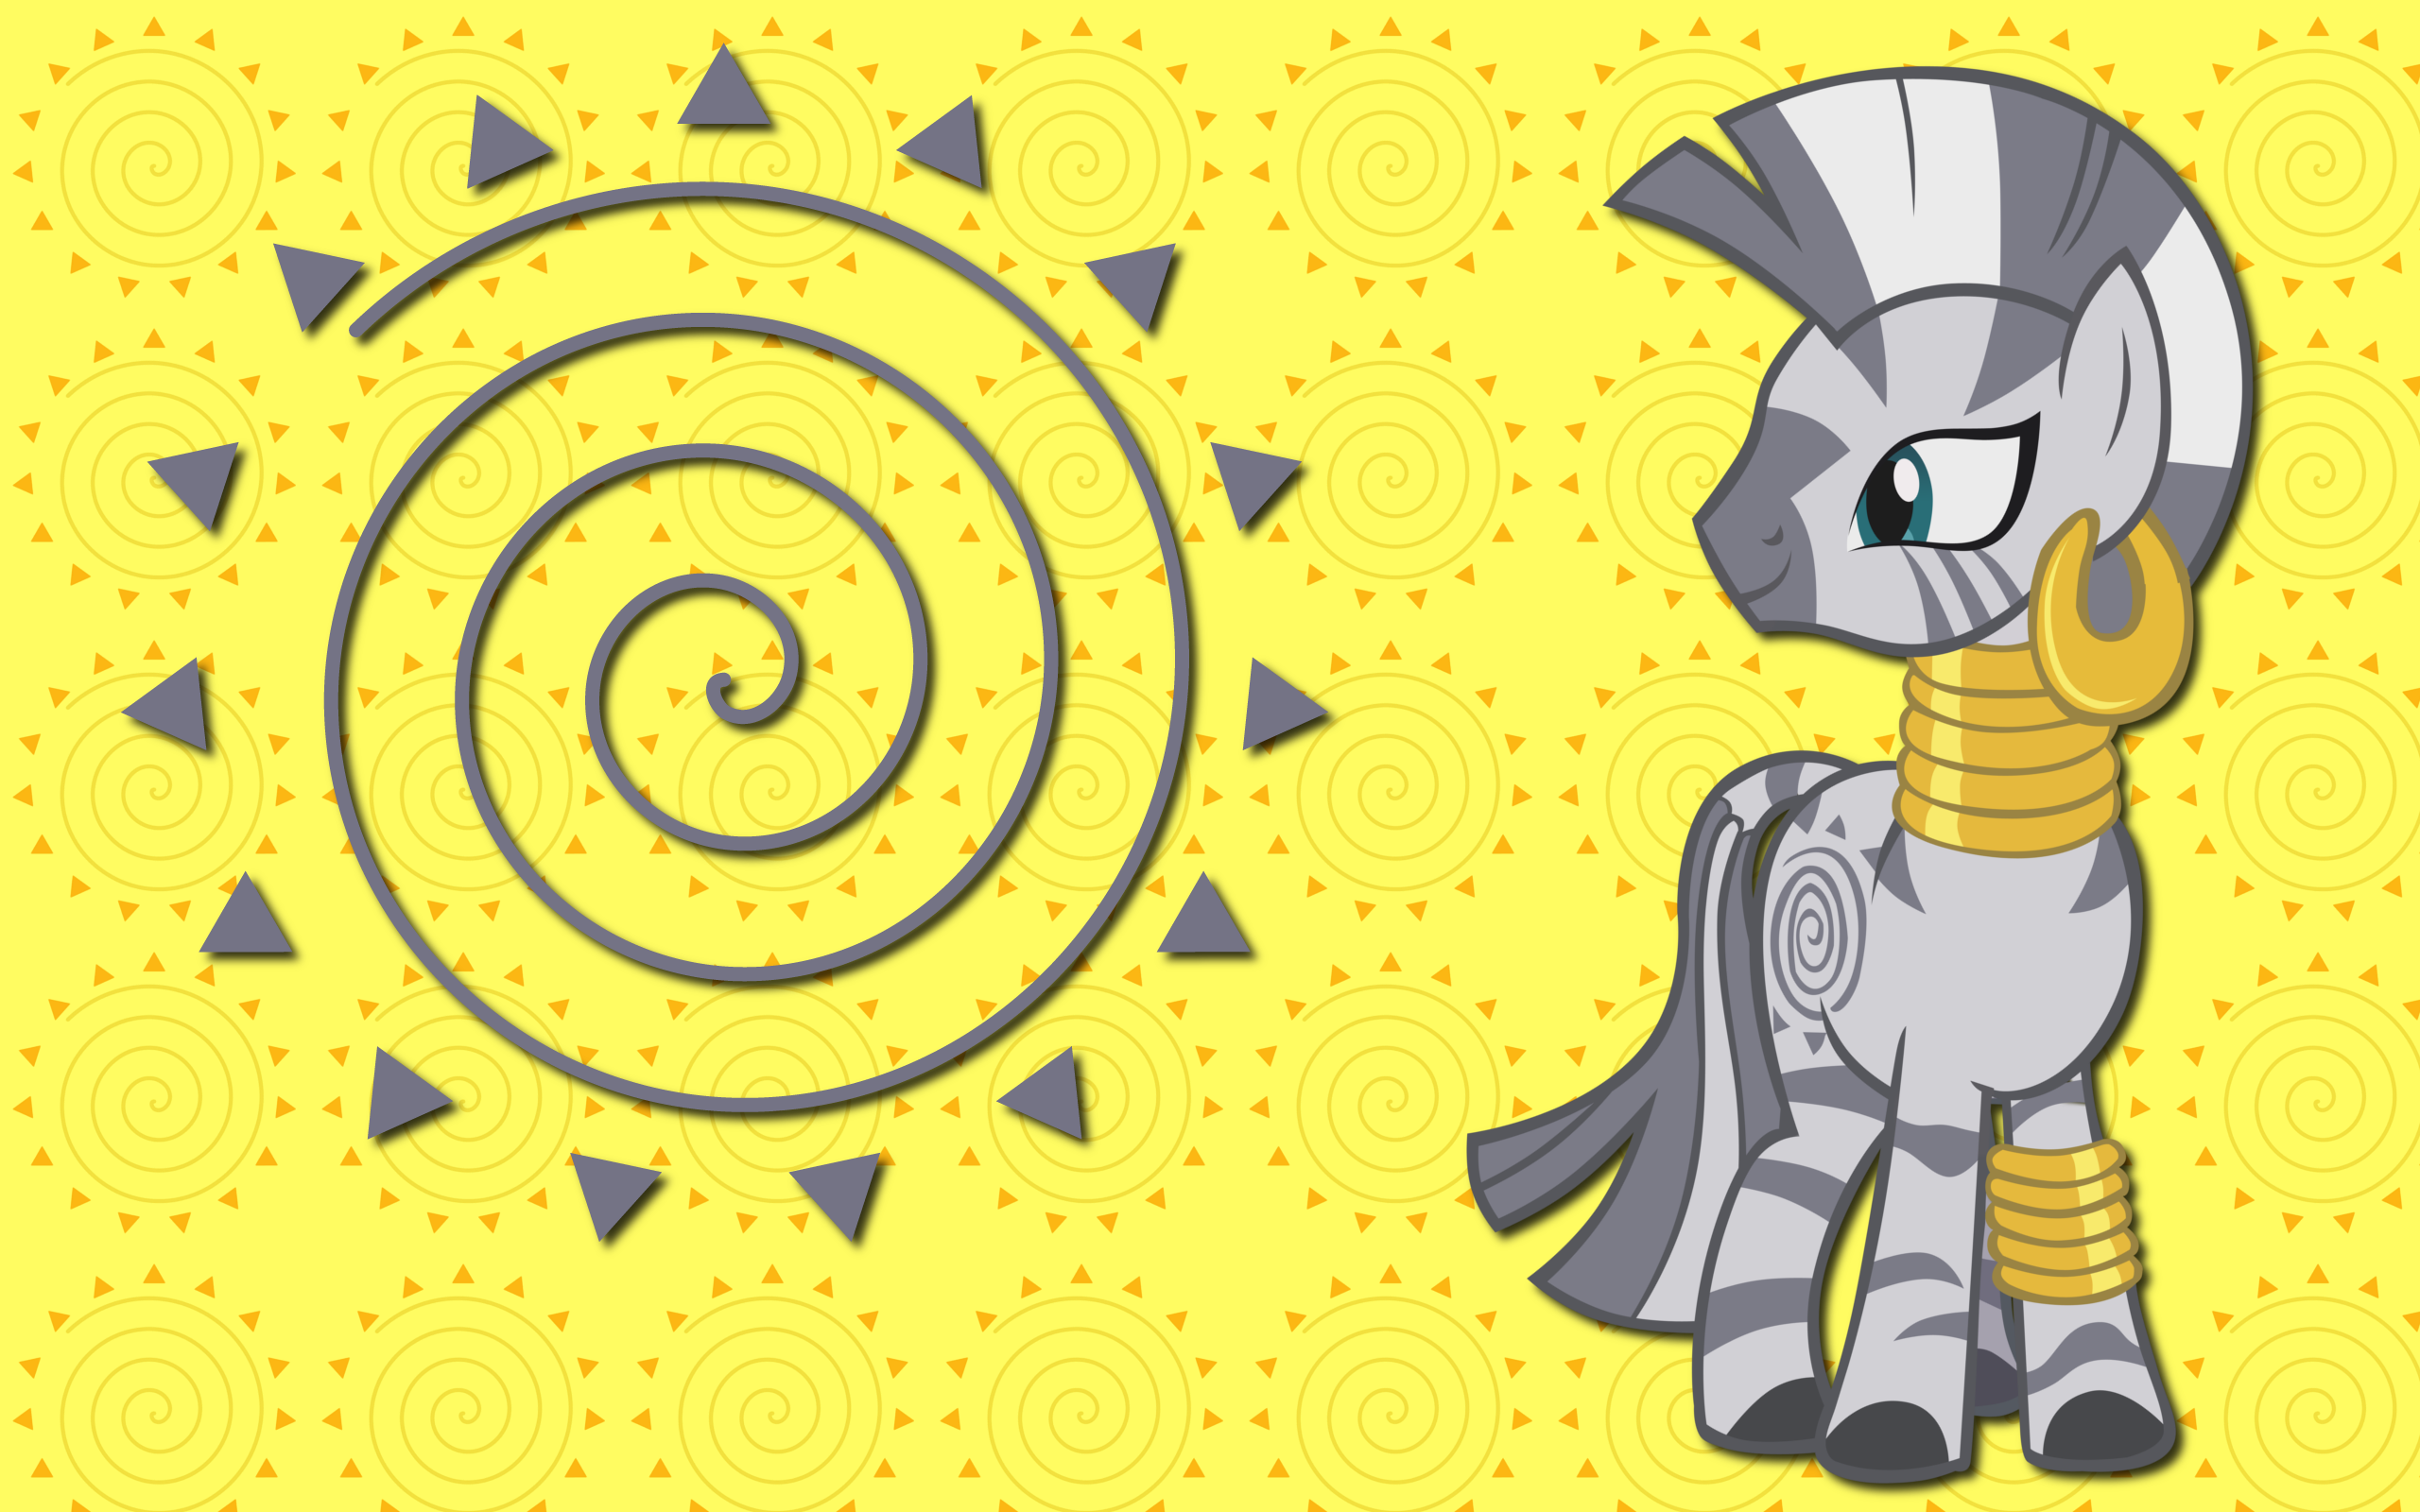 Zecora WP by AliceHumanSacrifice0, Cottonbby and ooklah